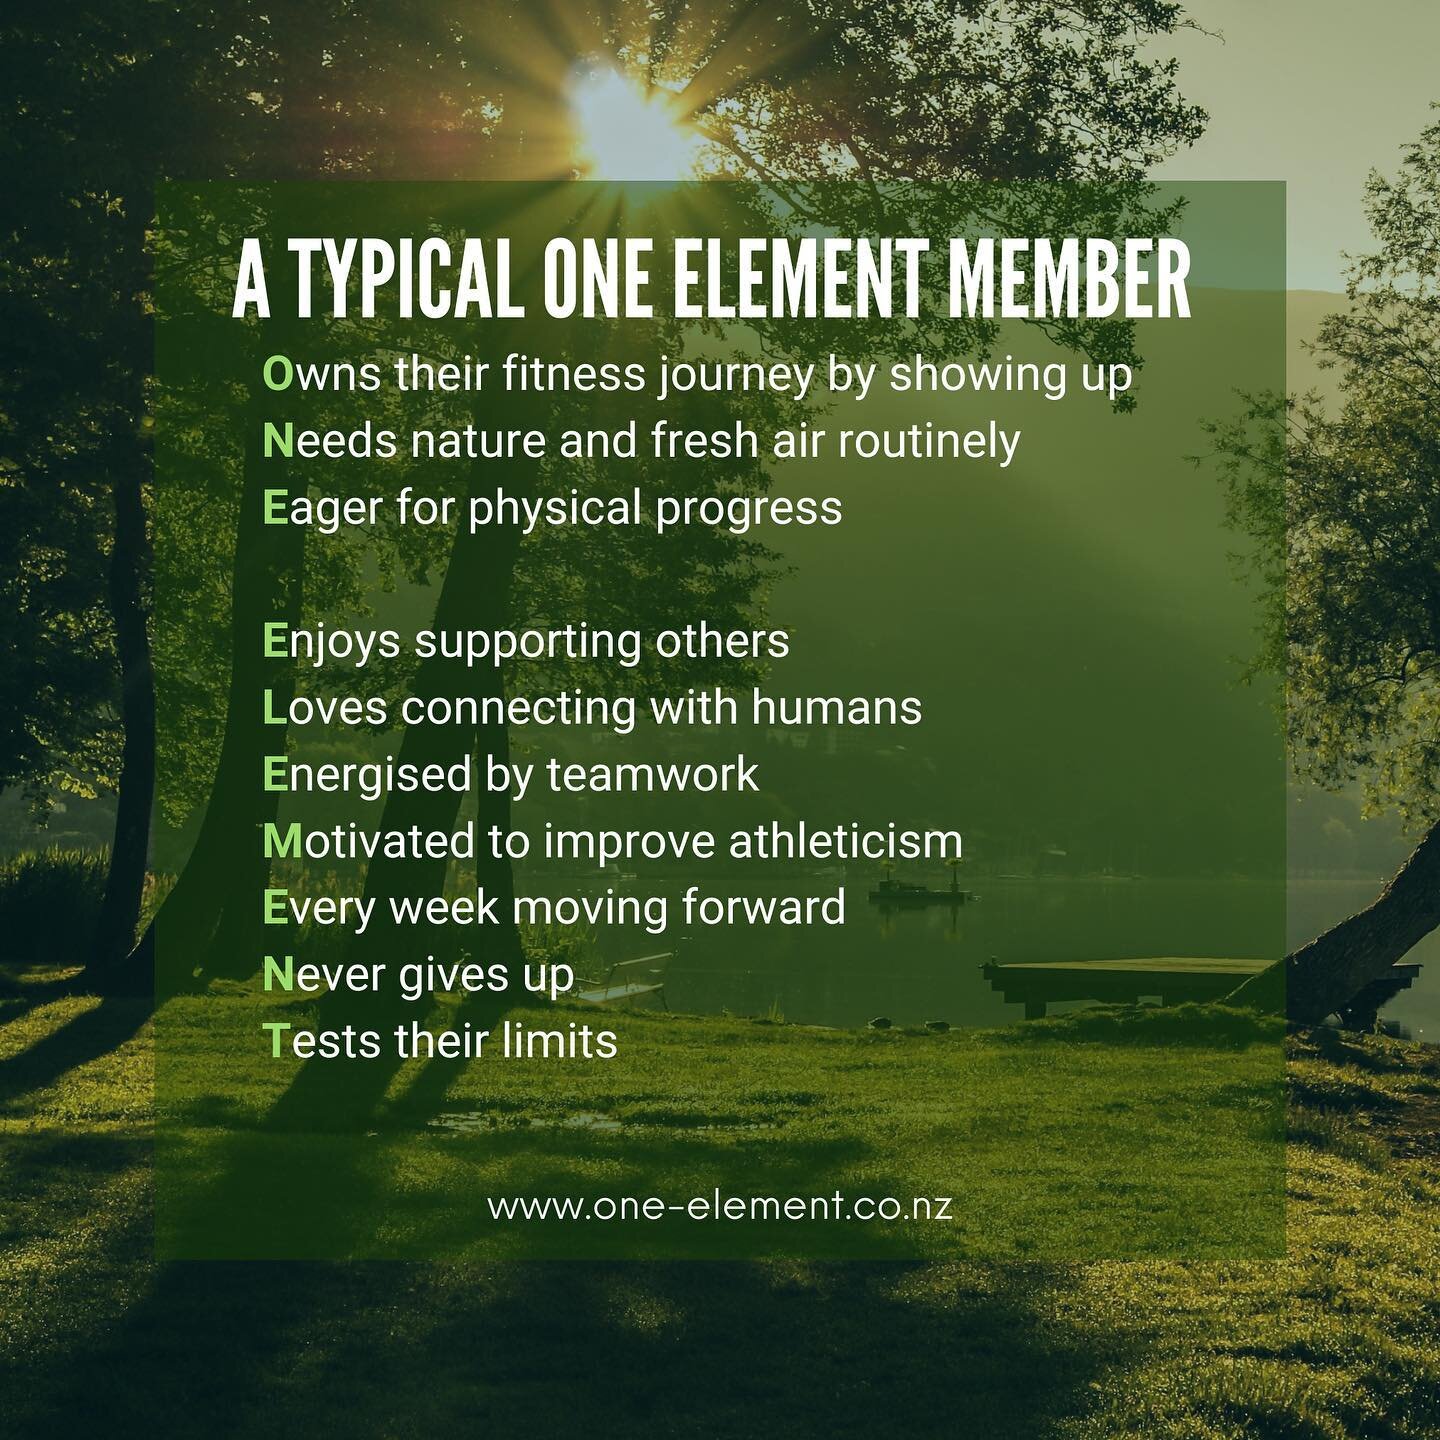 From New Zealand, up to Scotland, to Ireland and to England, these are the common personality traits of One Element members. 

On an early morning walk with a friend, fellow expat and OENZ member today, she was recounting her fitness journey in Japan